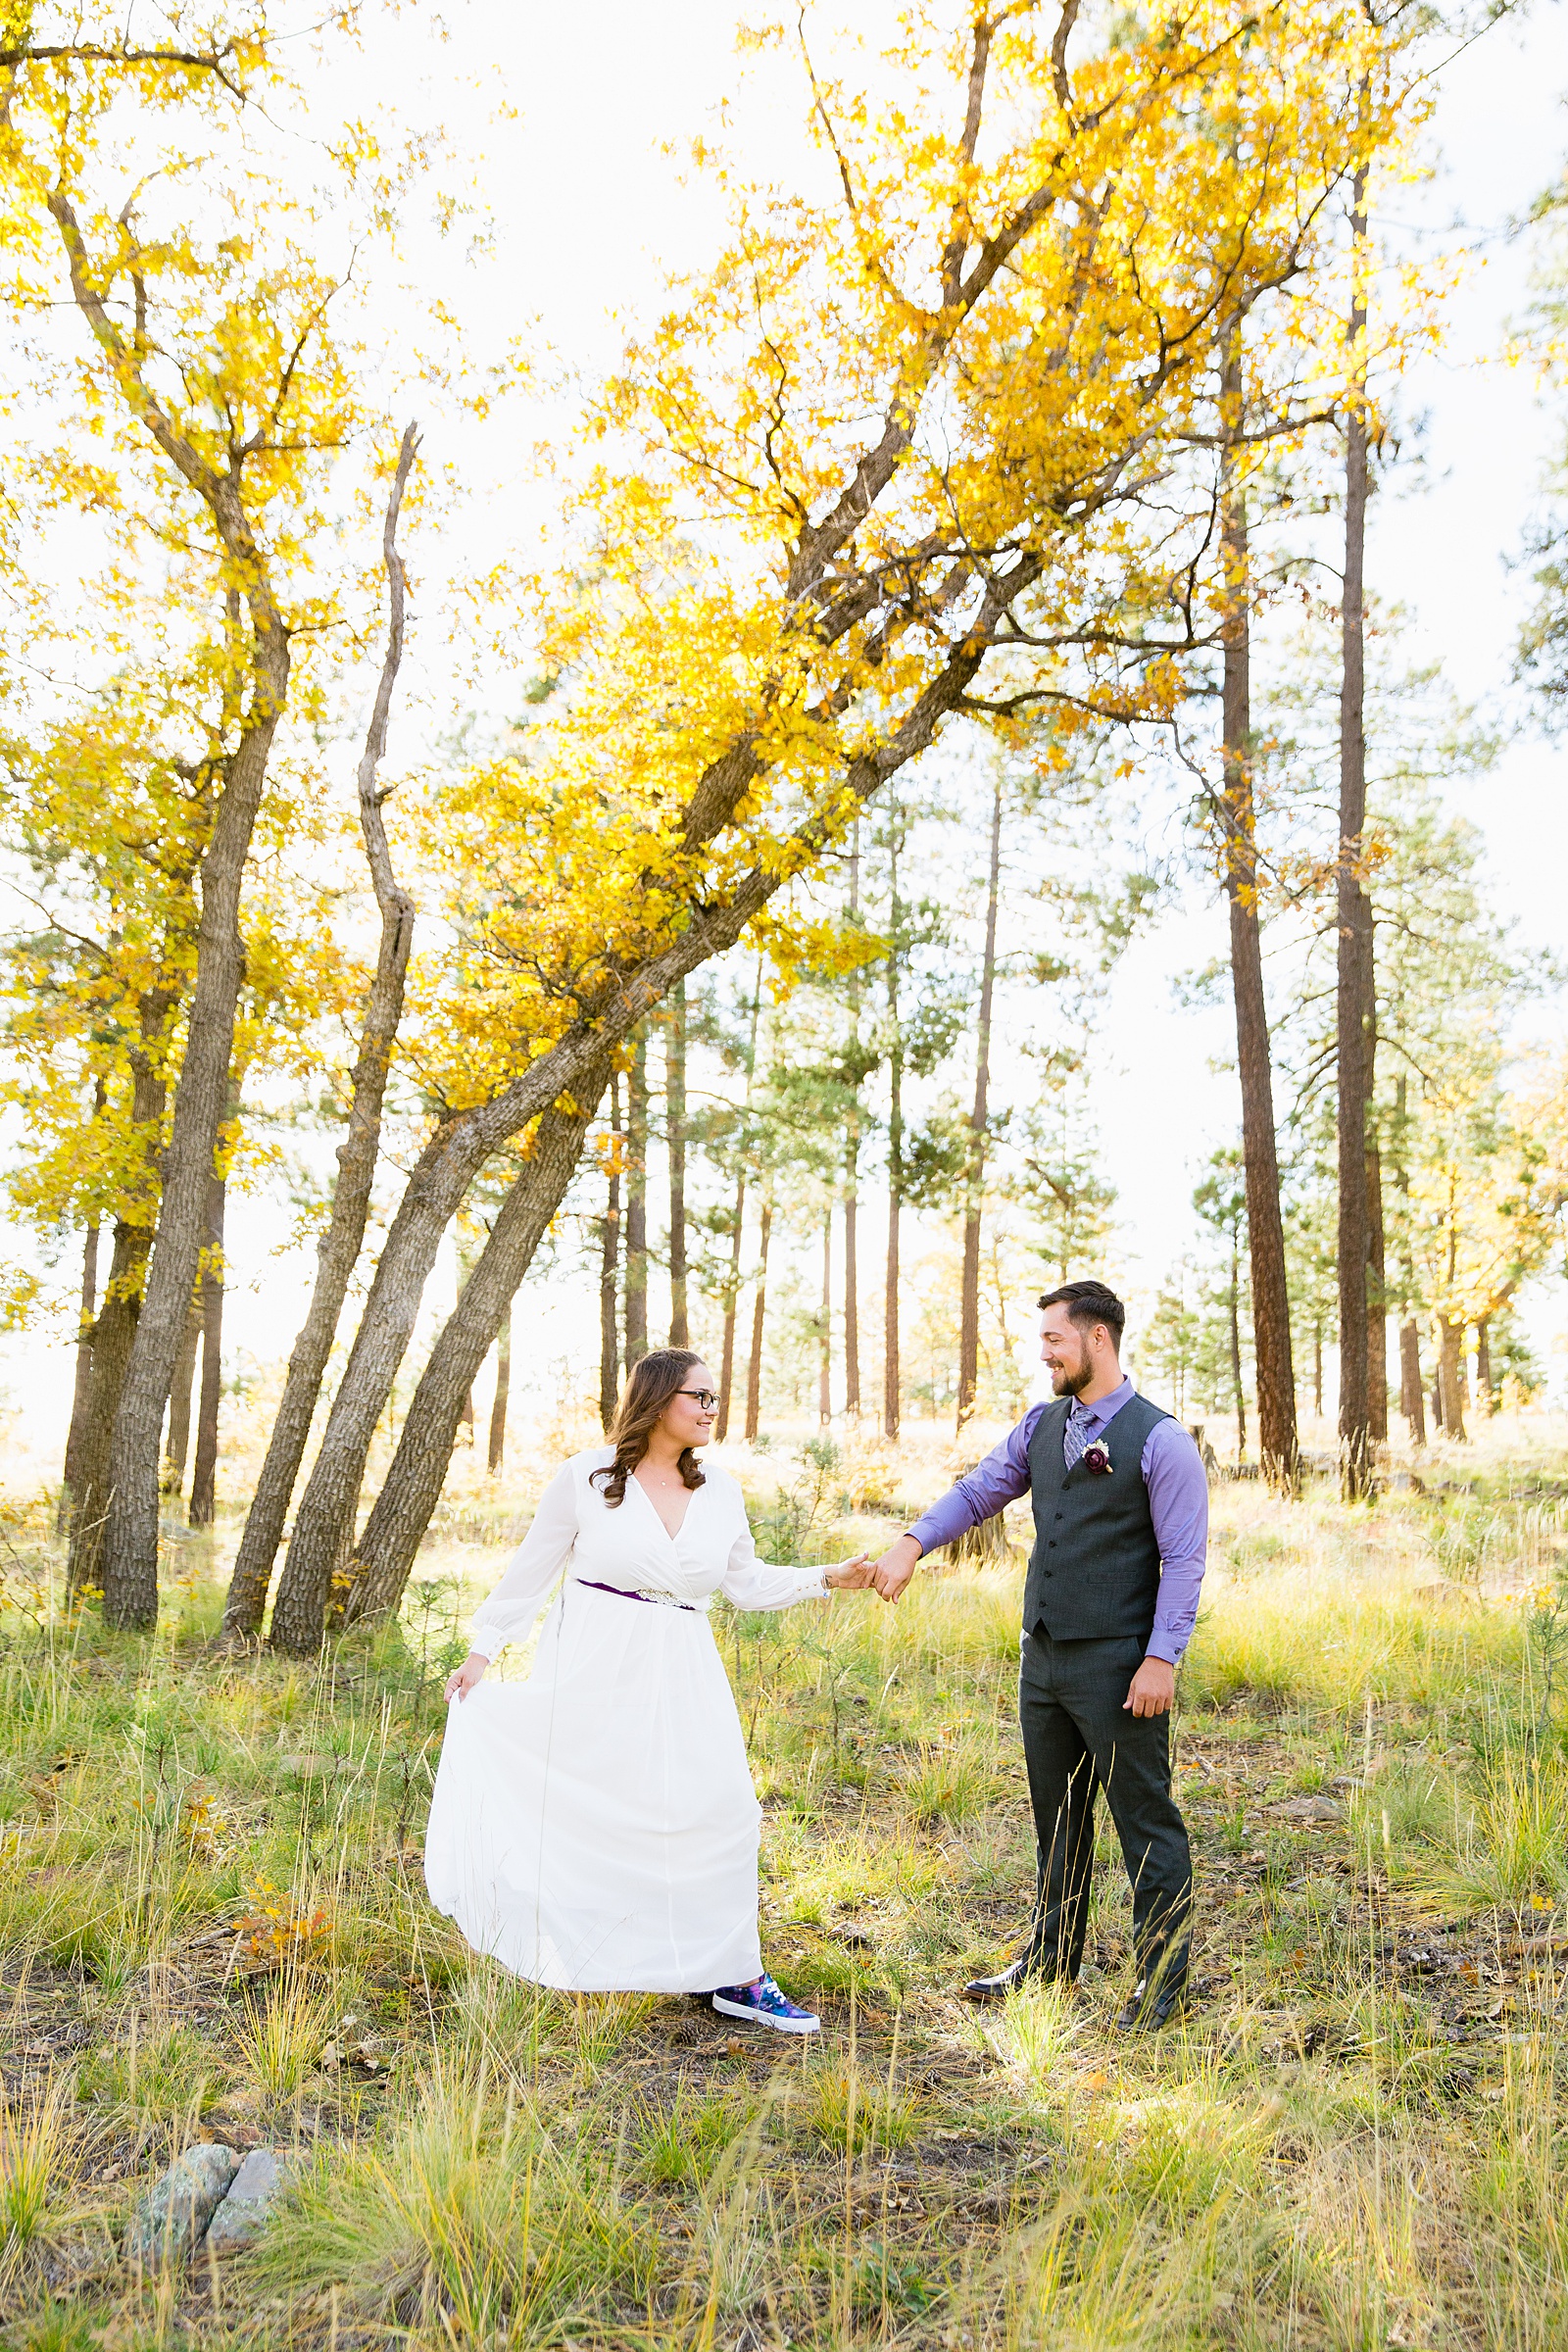 Bride and Groom dancing together for their Mogollon Rim elopement by Payson elopement photographer PMA Photography.